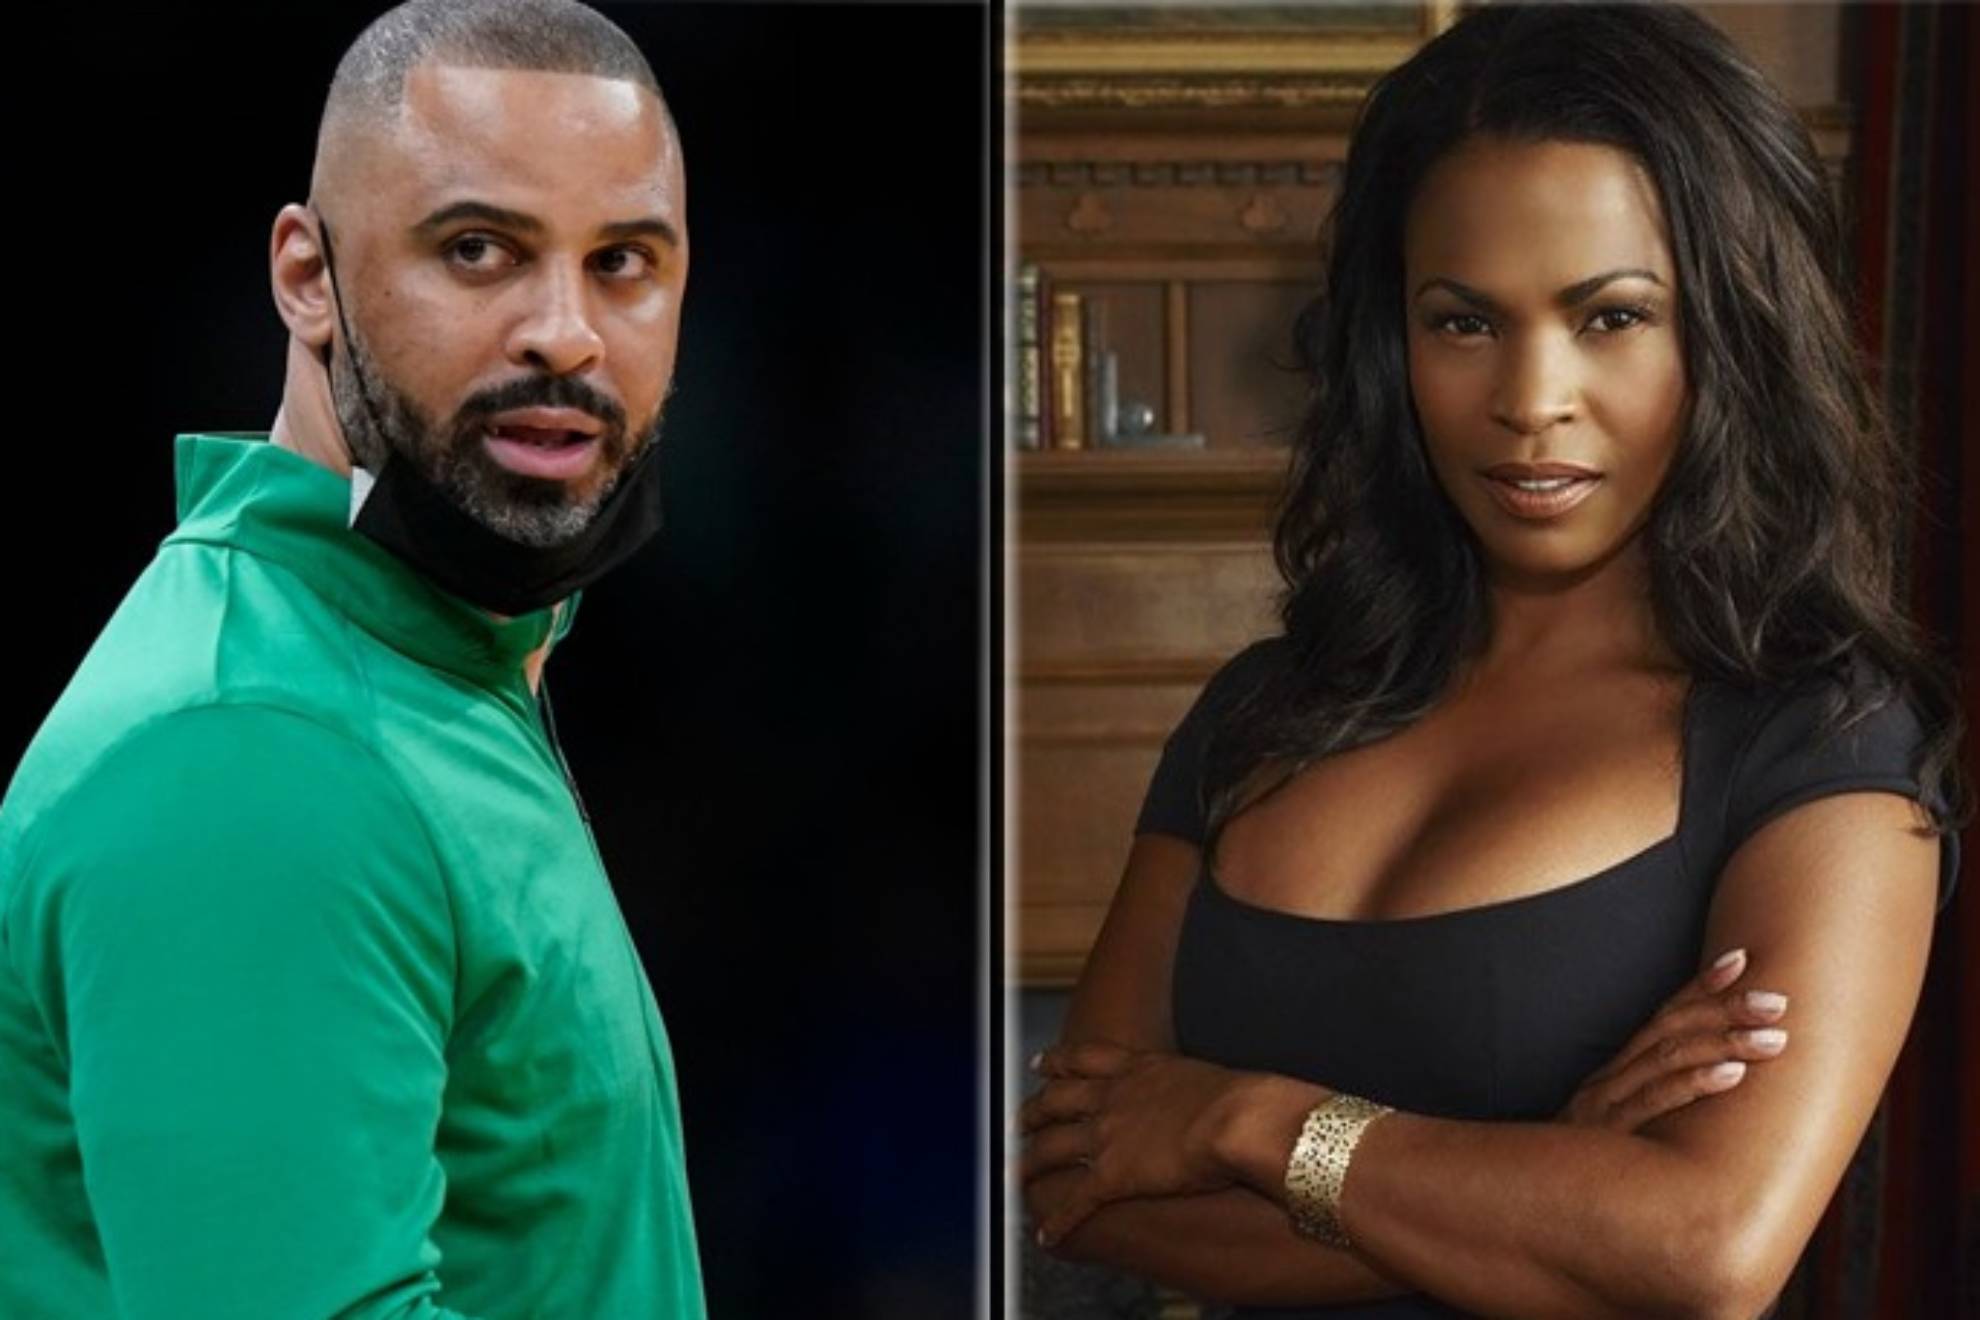 Ime Udoka breaks his silence about his affair and his Boston Celtics suspension